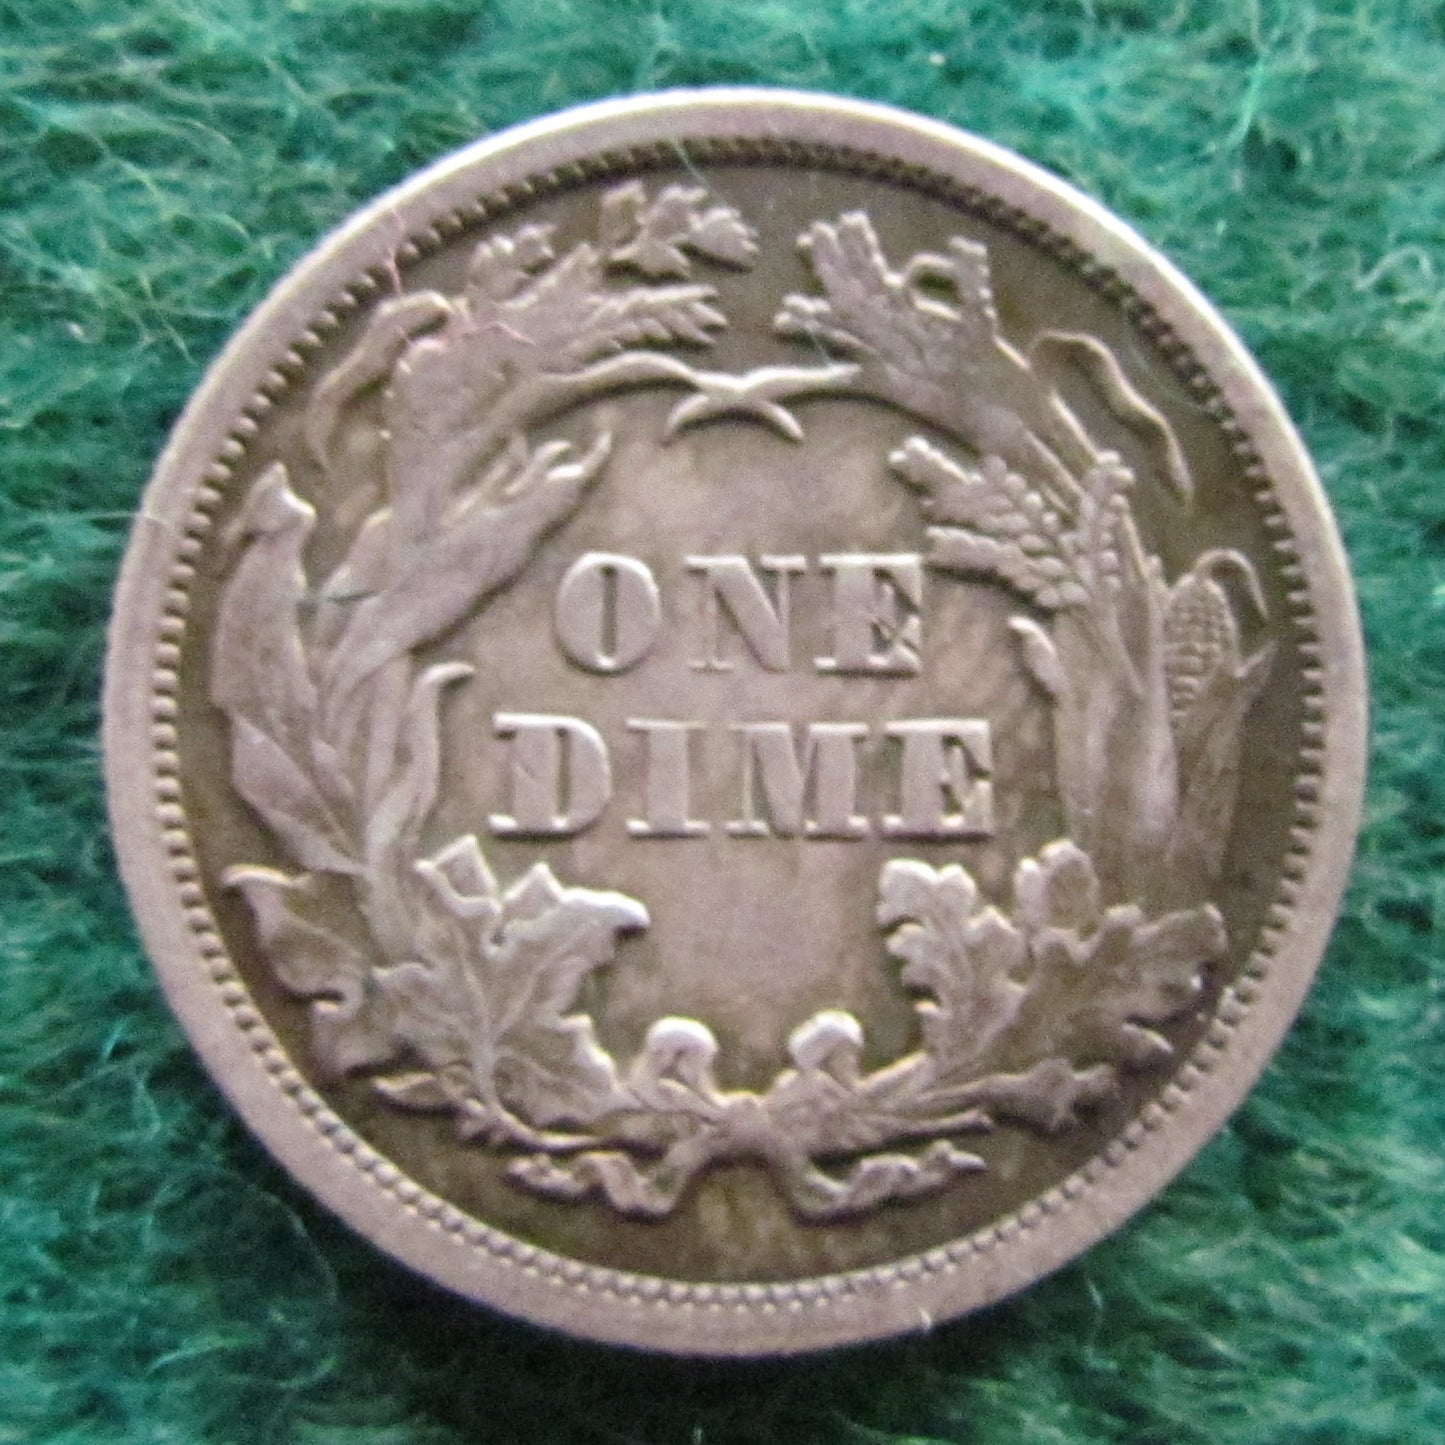 USA American 1874 Silver Seated Liberty Dime Coin - Arrows At Date - Circulated